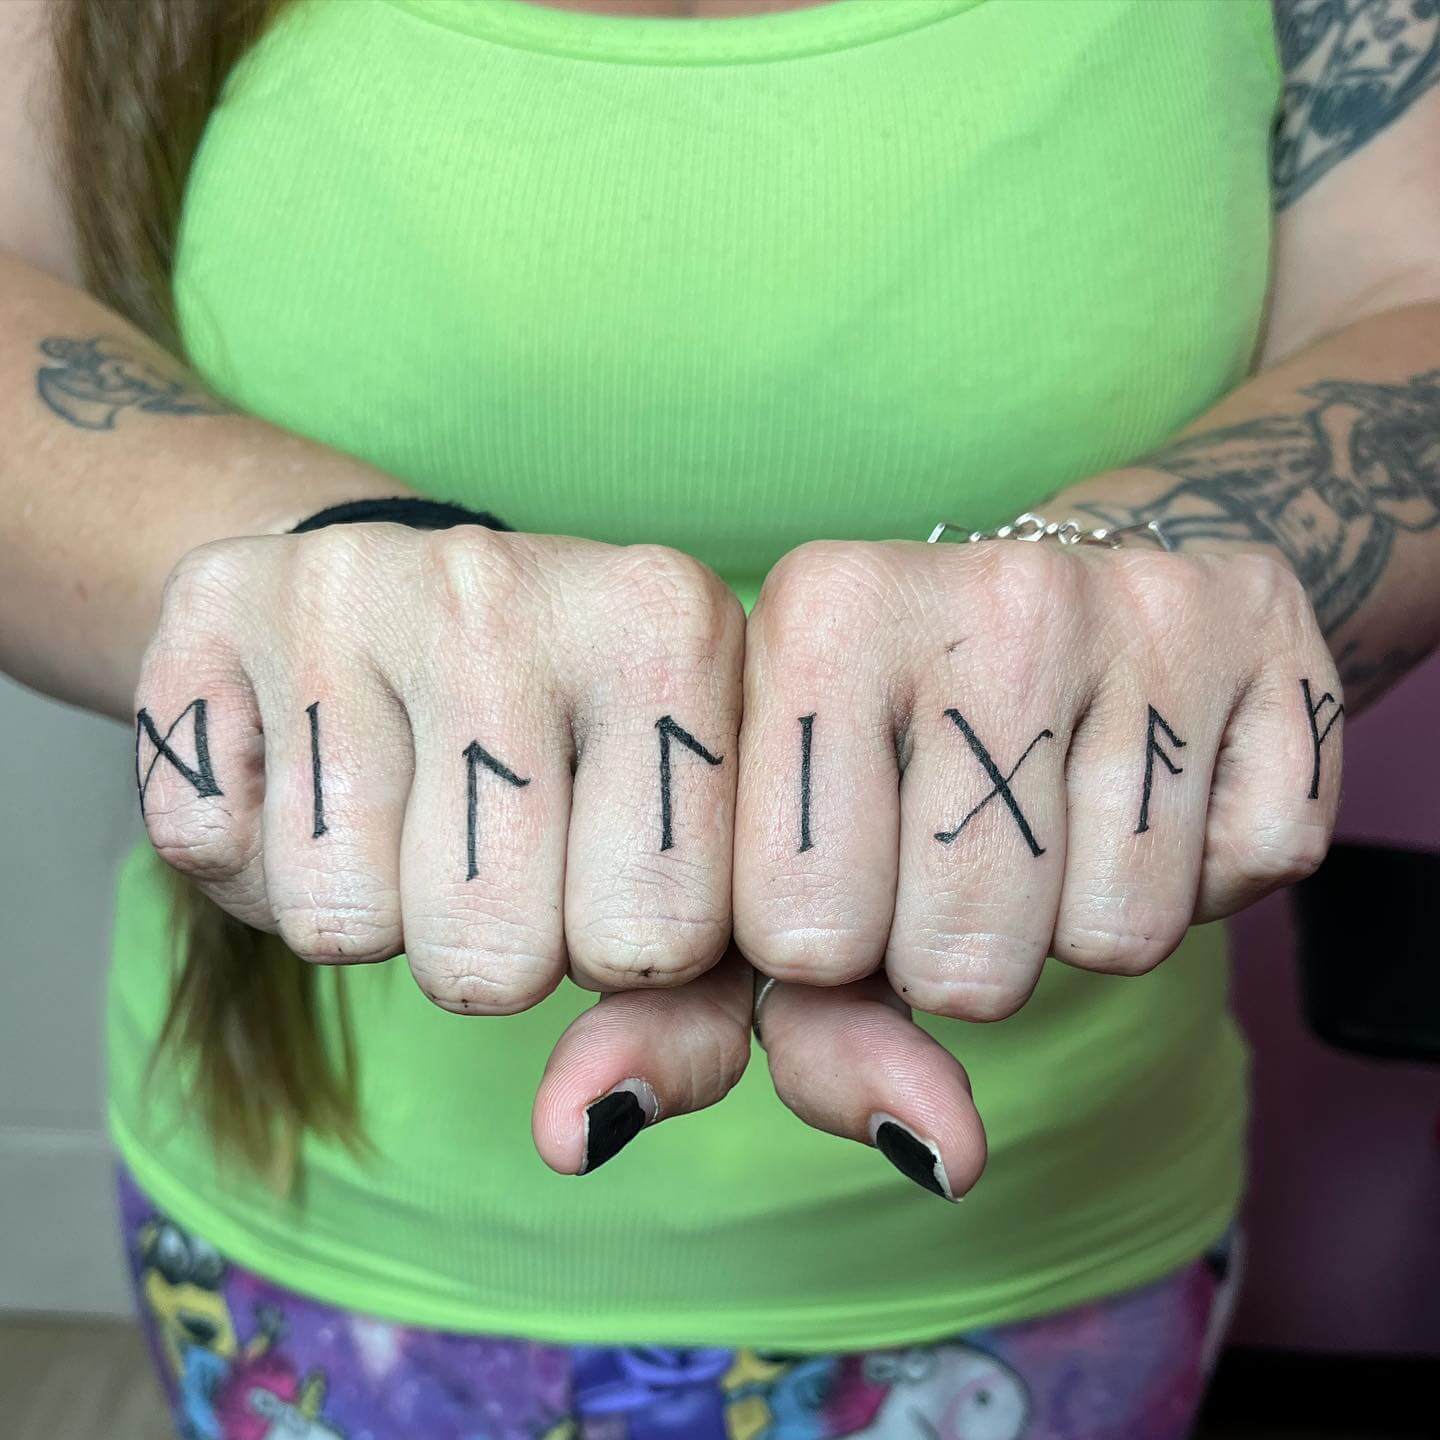 A Guide To Finger Tattoos: What To Consider Before Getting Inked